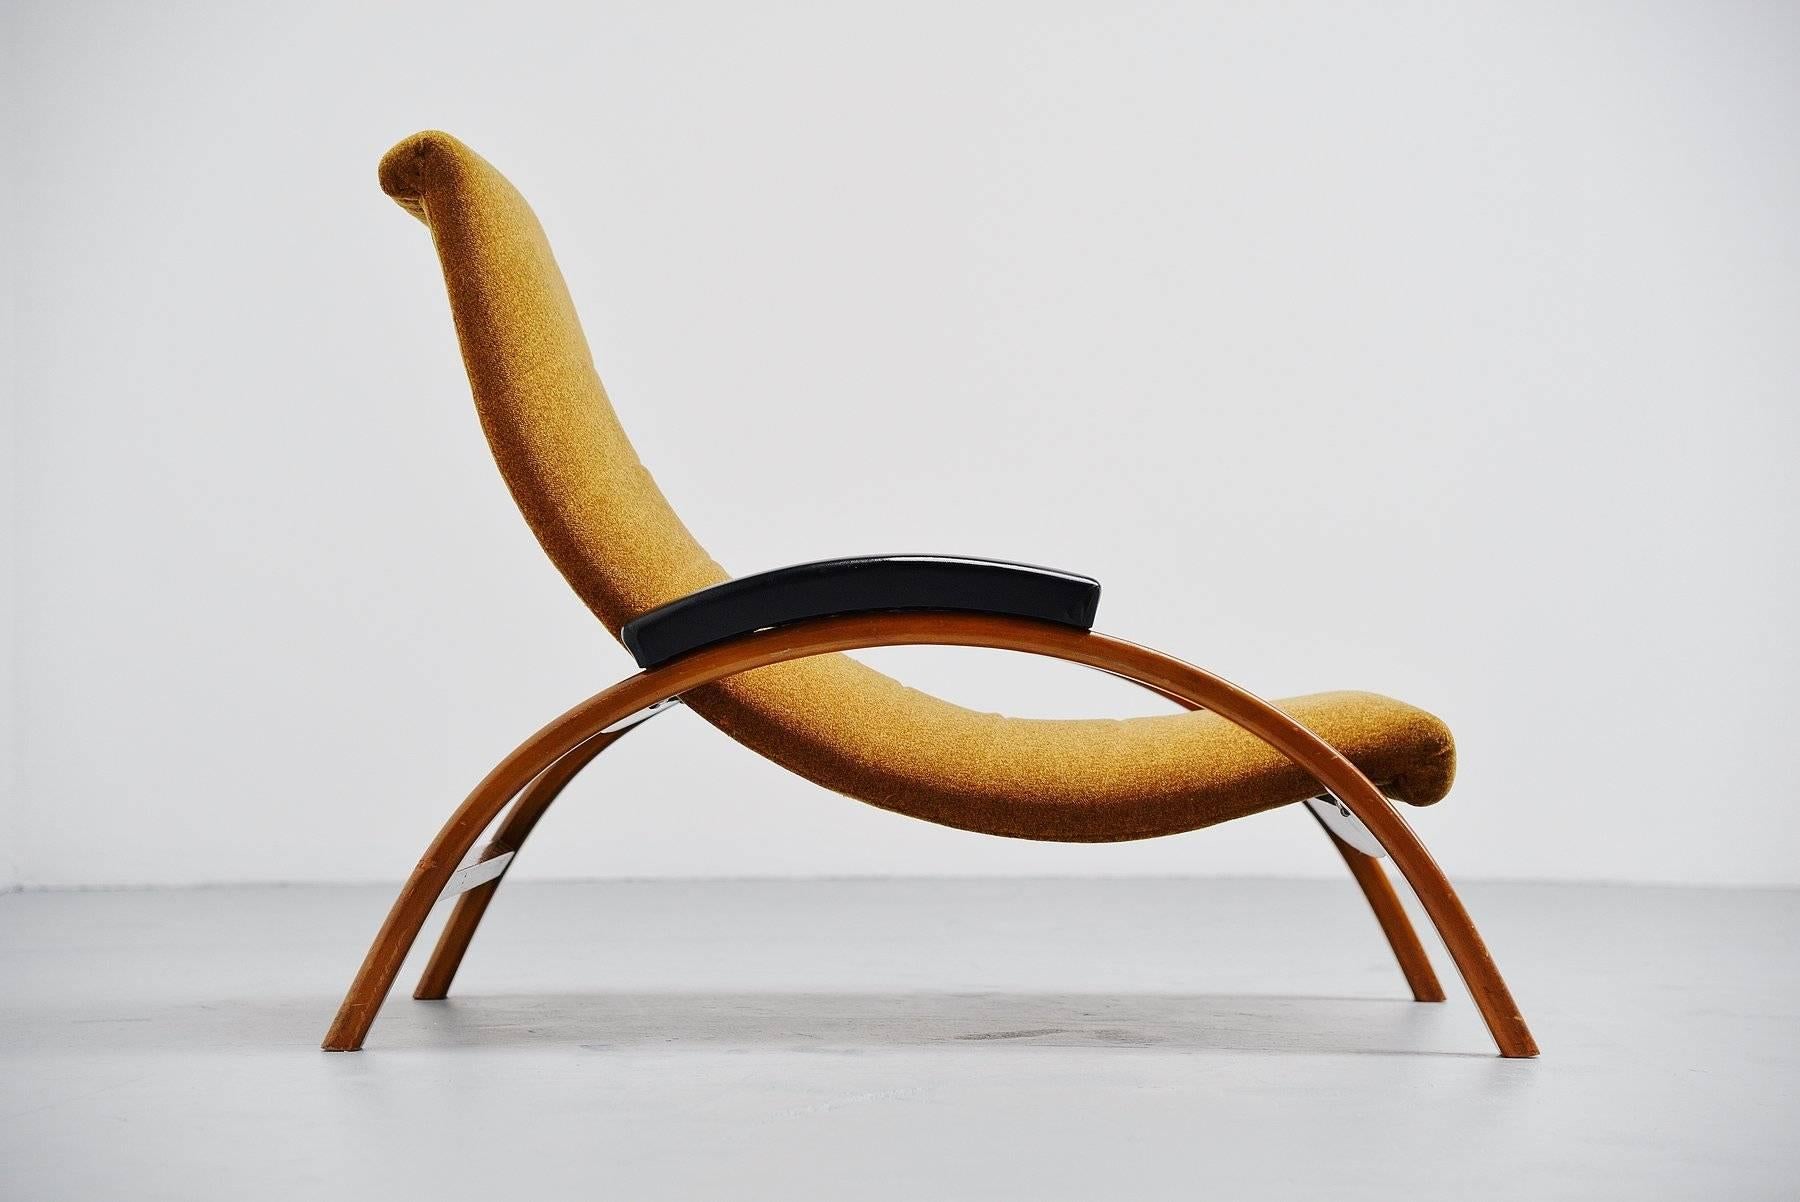 Very nice and unusual shaped adjustable lounge chair made in Italy 1950. This chair has a bentwood walnut frame and black vinyl armrests. The upholstery is still original and has a forest green mohair fabric. This is still in very good and clean